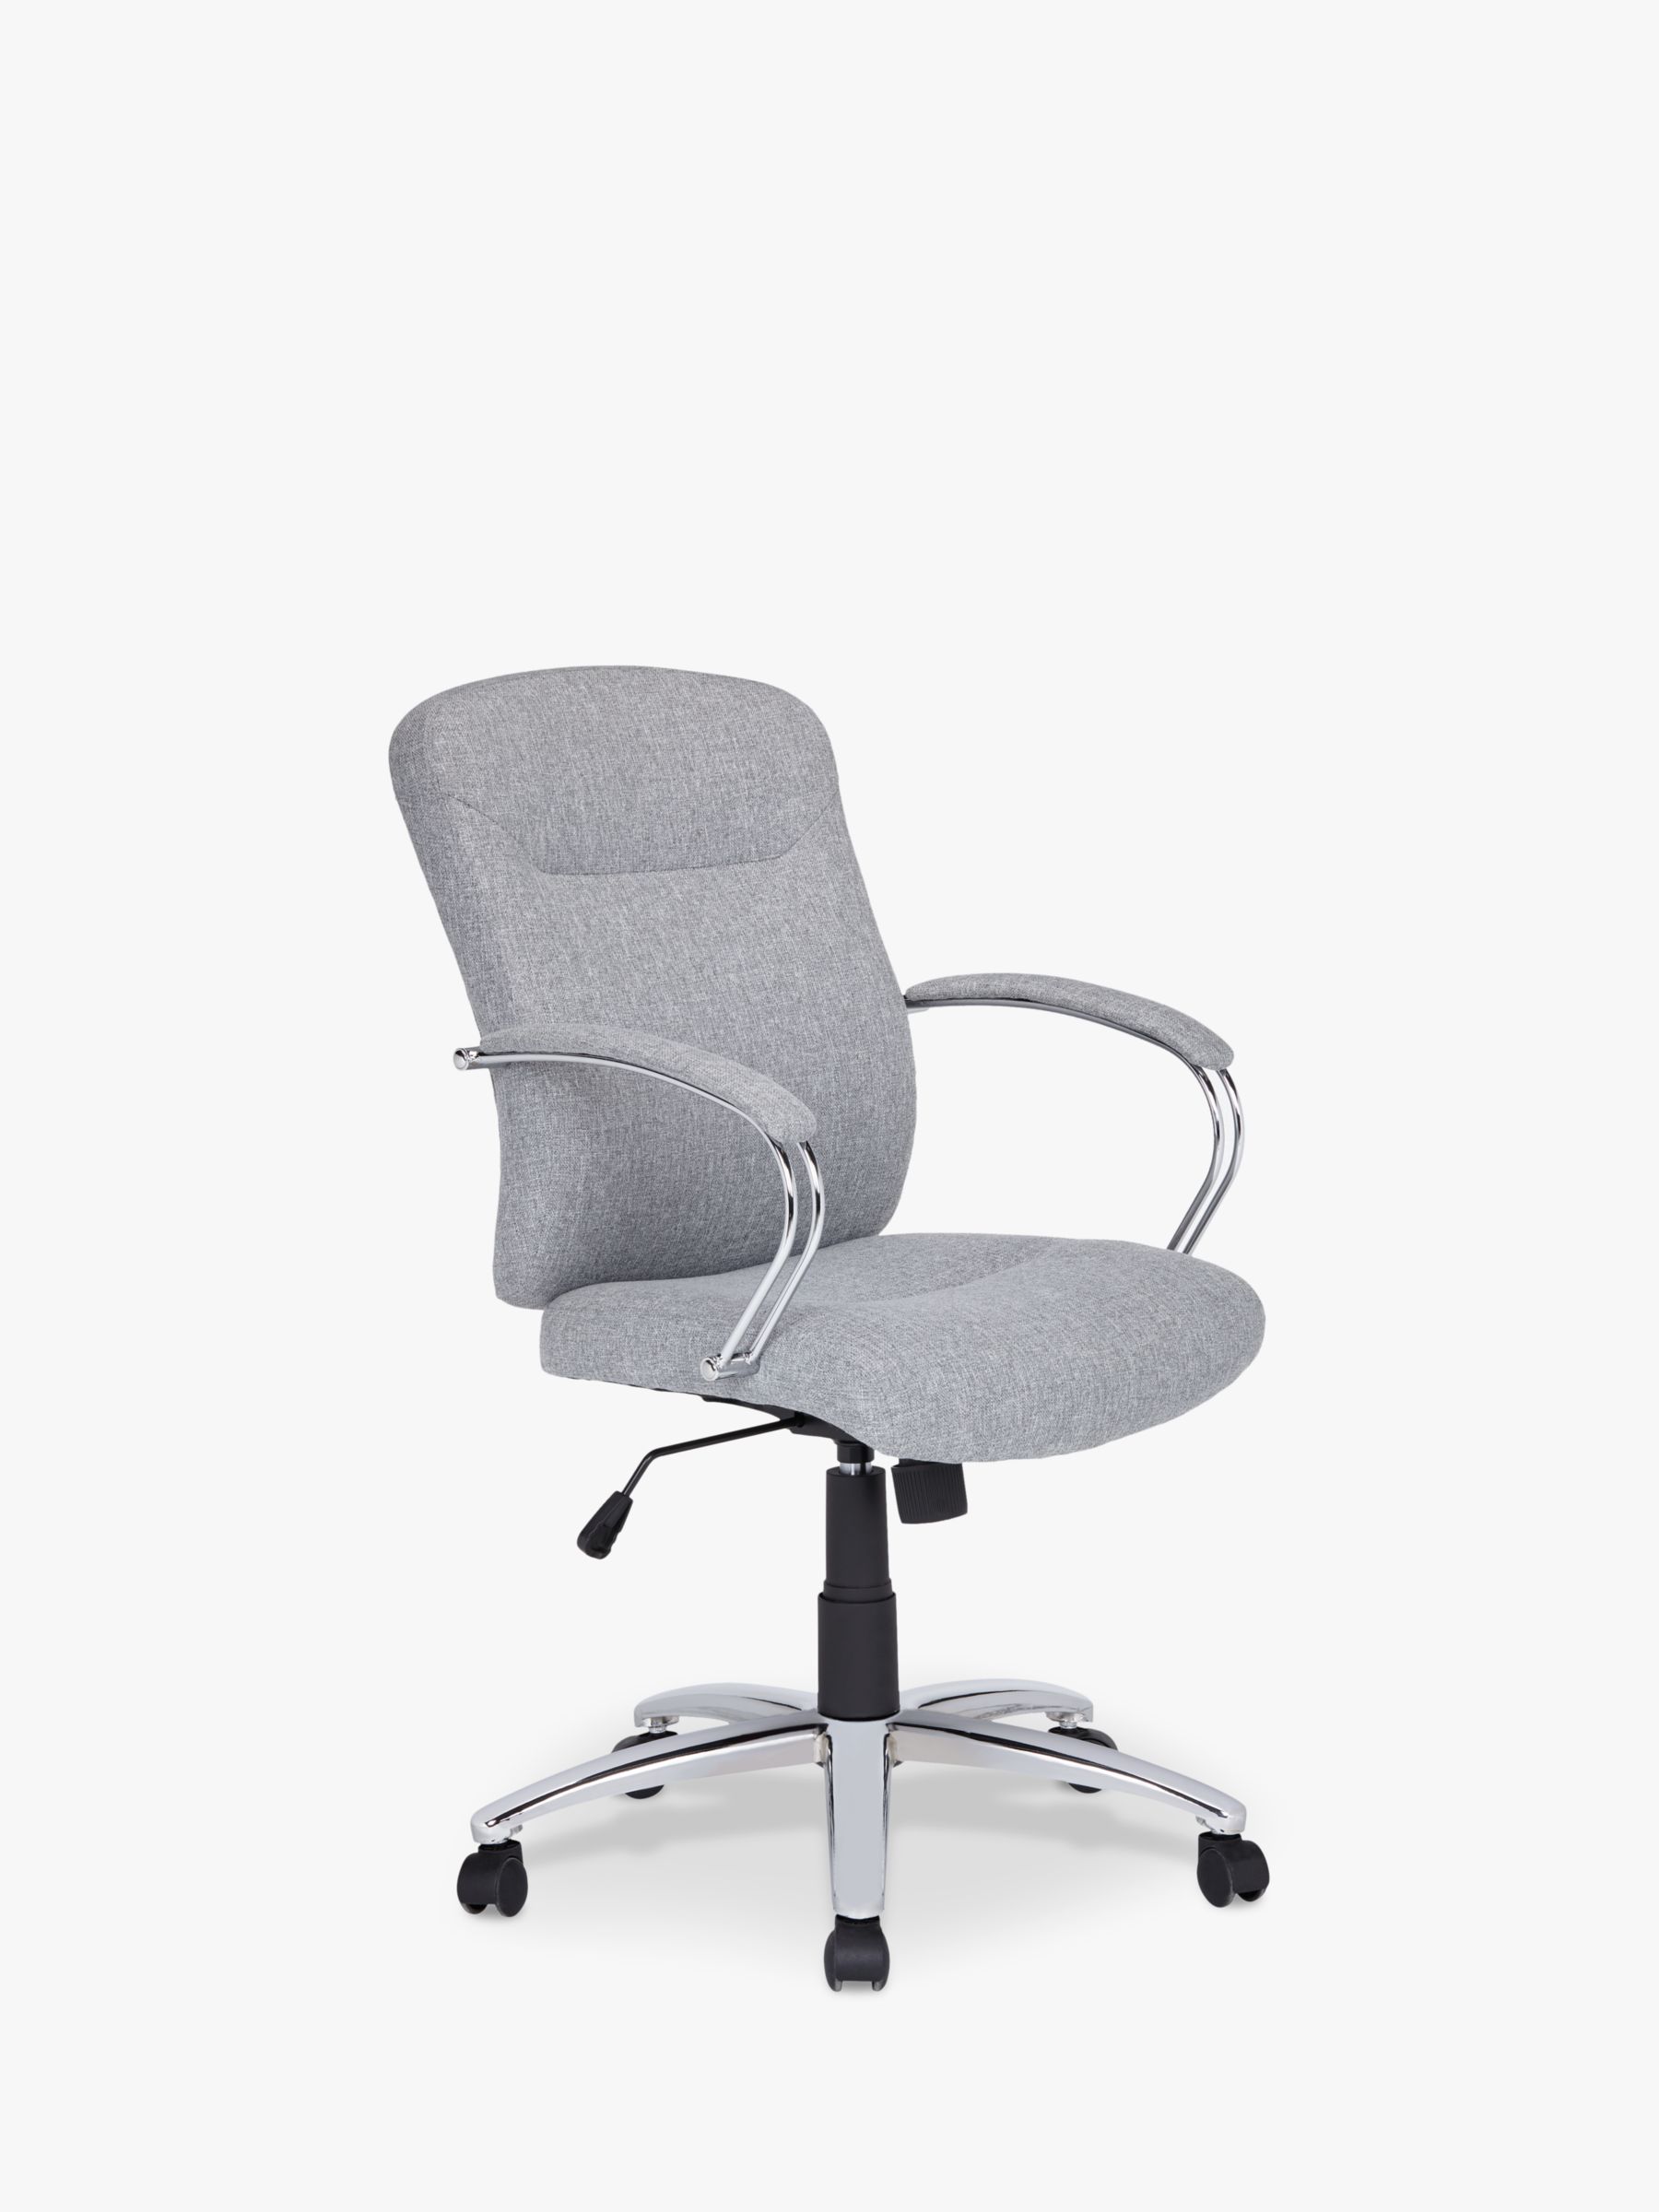 mesh texture, gray lining of office chair, background Stock Photo